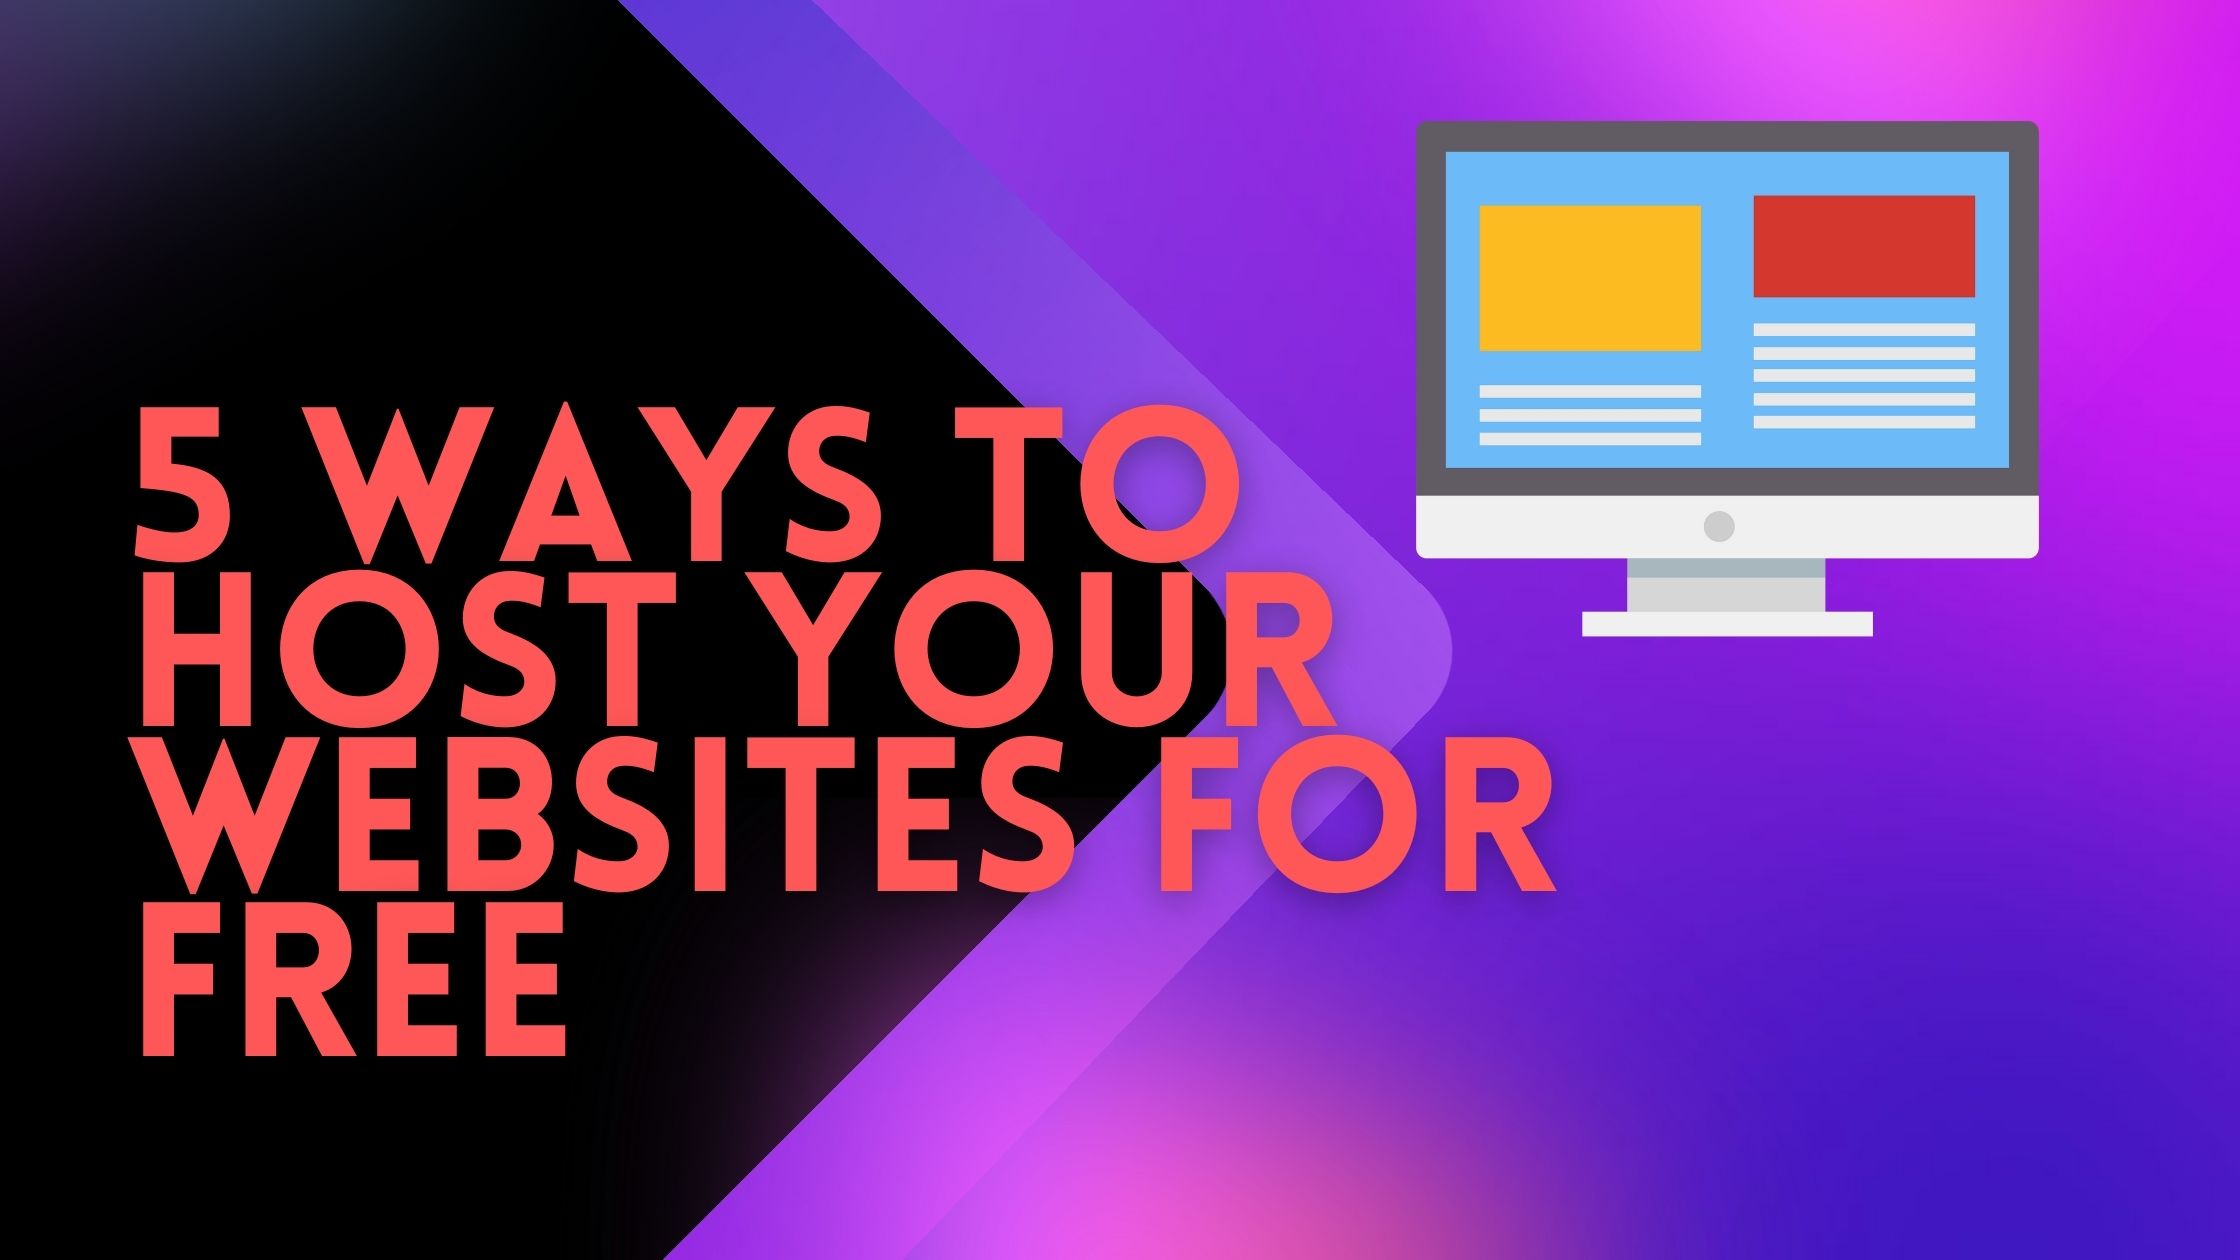 5 platforms where you can host your websites for free